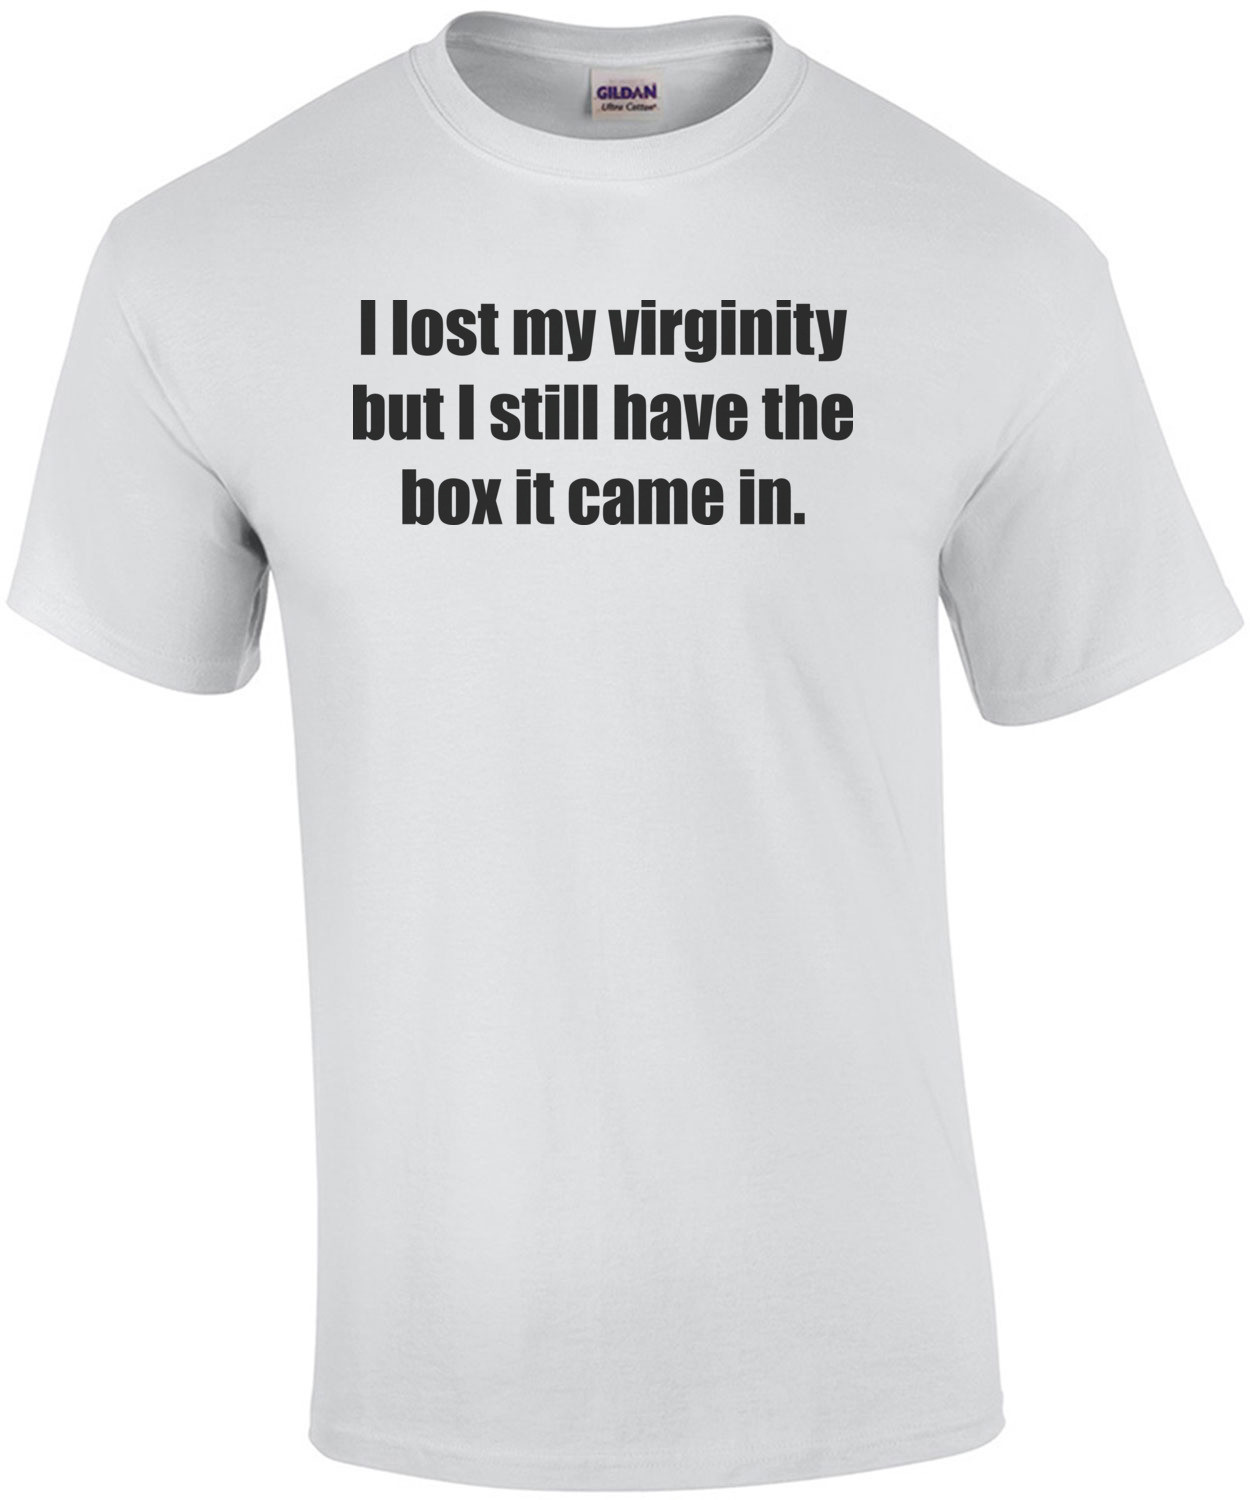 I lost my virginity but I still have the box it came in. Shirt